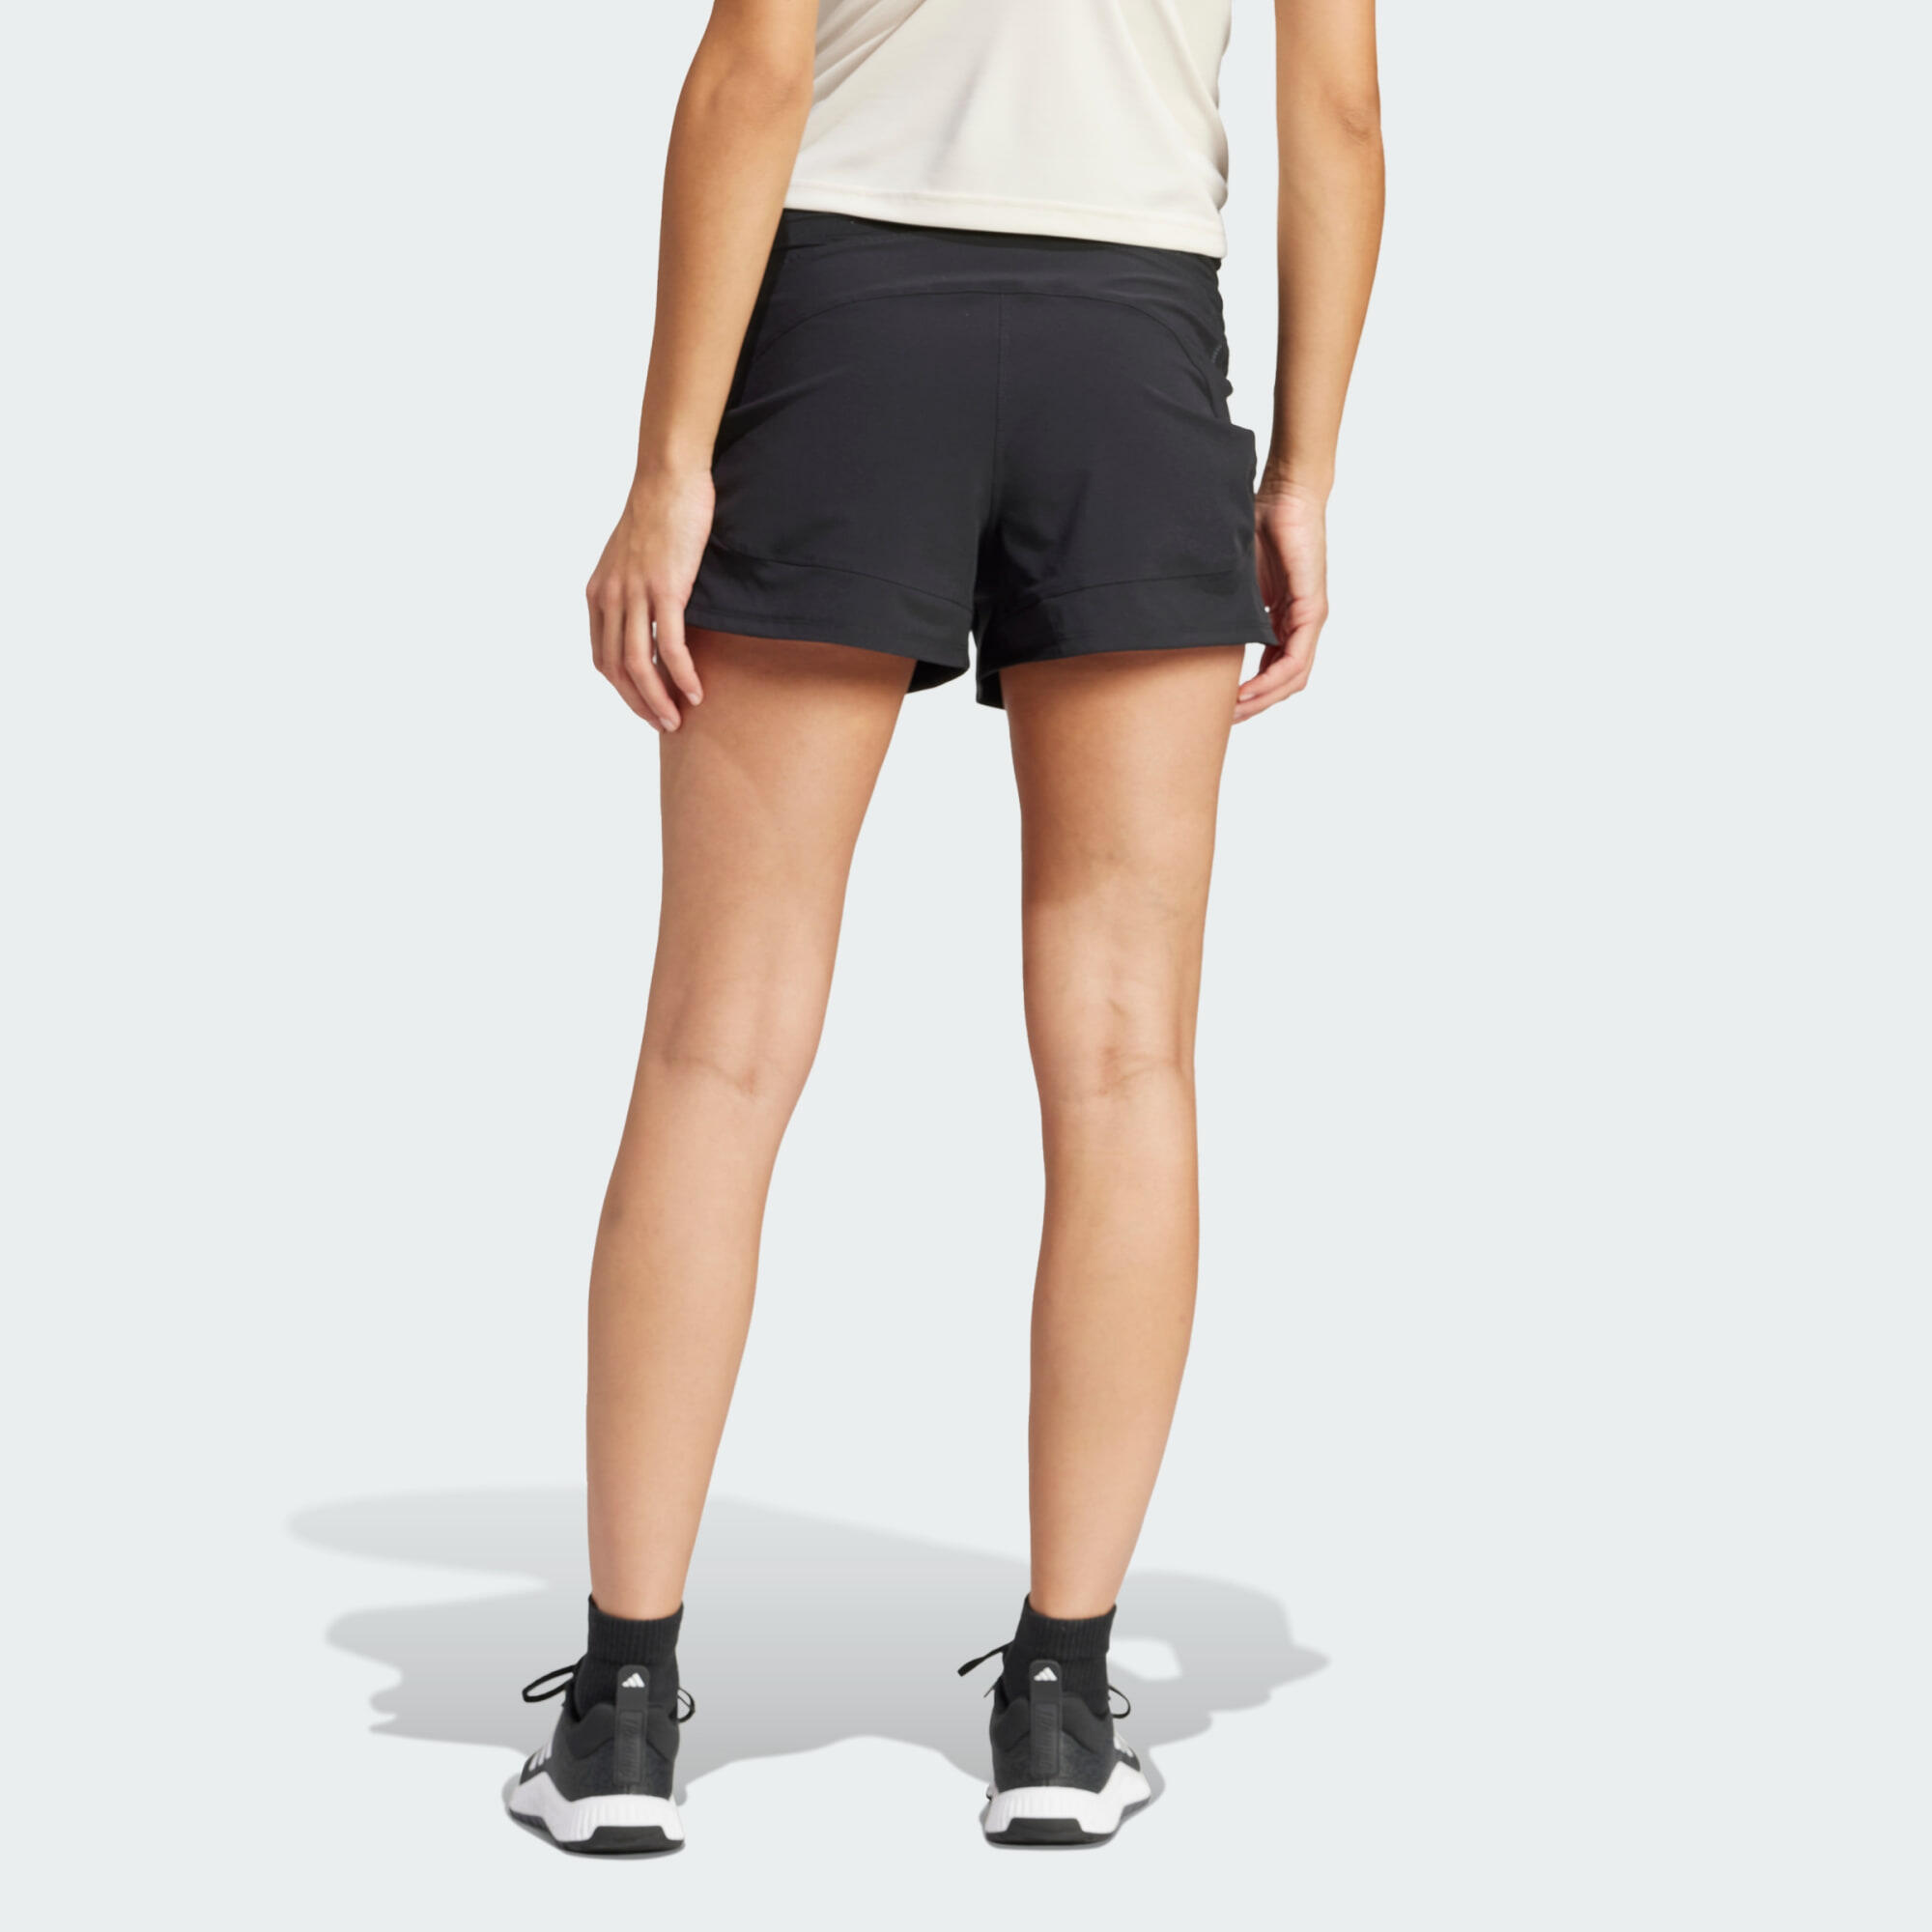 Pacer Woven Stretch Training Maternity Shorts 3/5